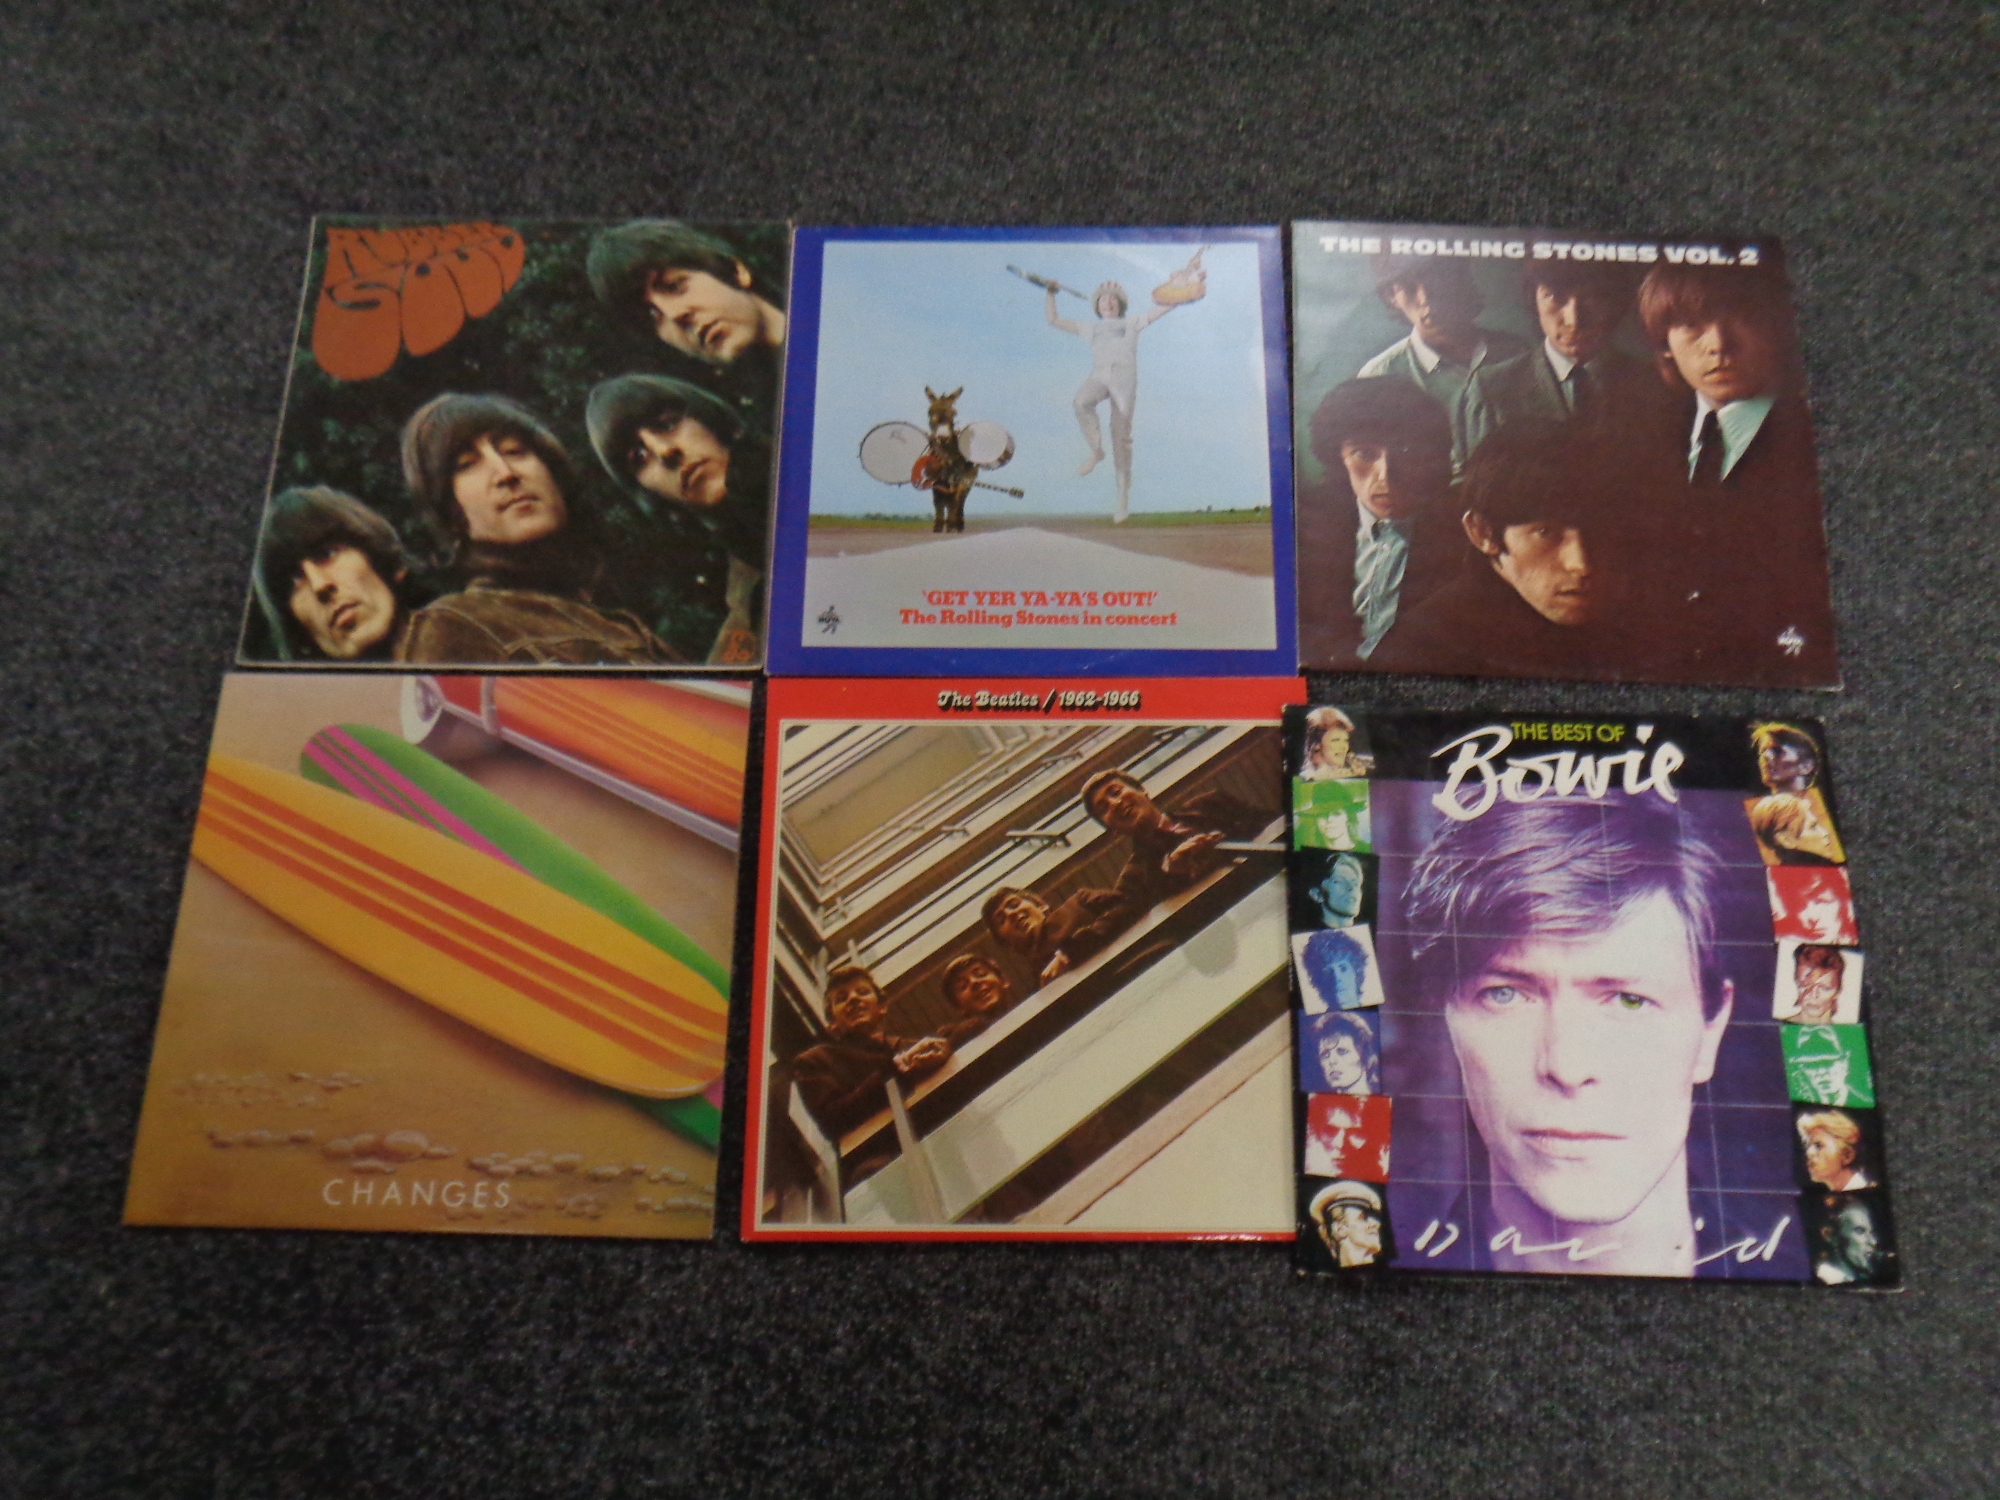 A box of a large quantity of vinyl LP's to include many albums by The Beatles, The Rolling Stones, - Image 6 of 9